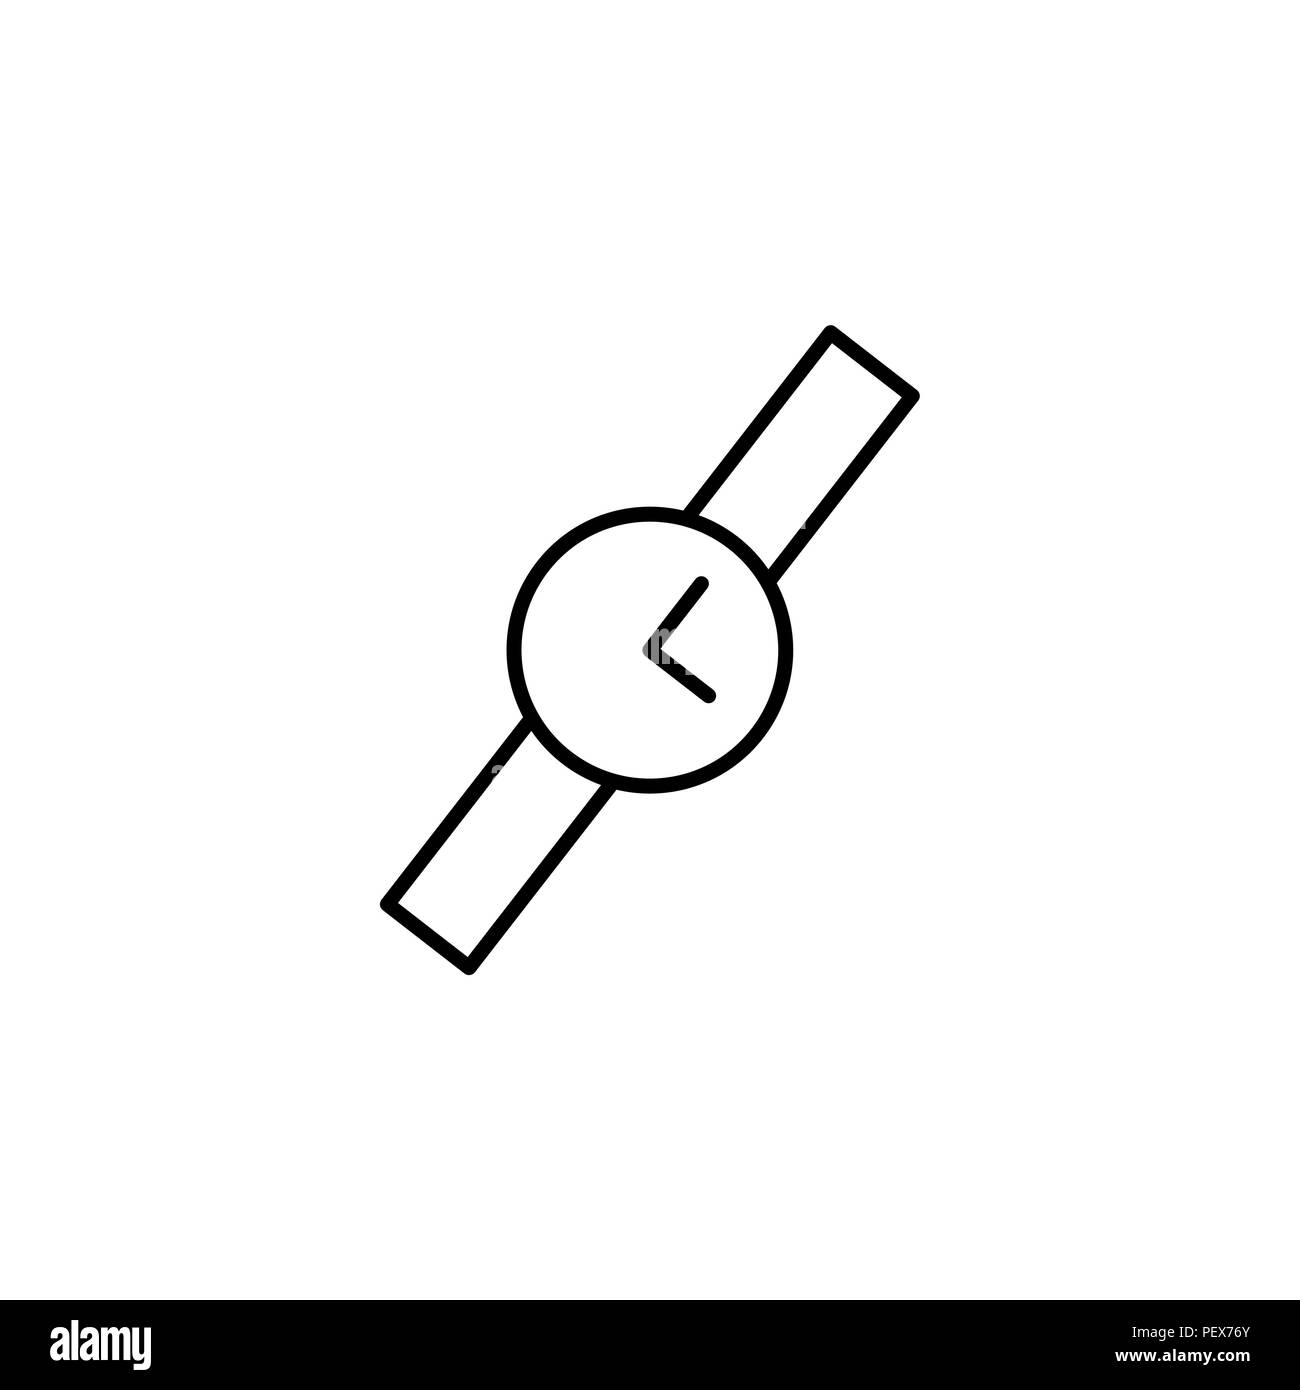 Wristwatch vector icon black on white background Stock Vector